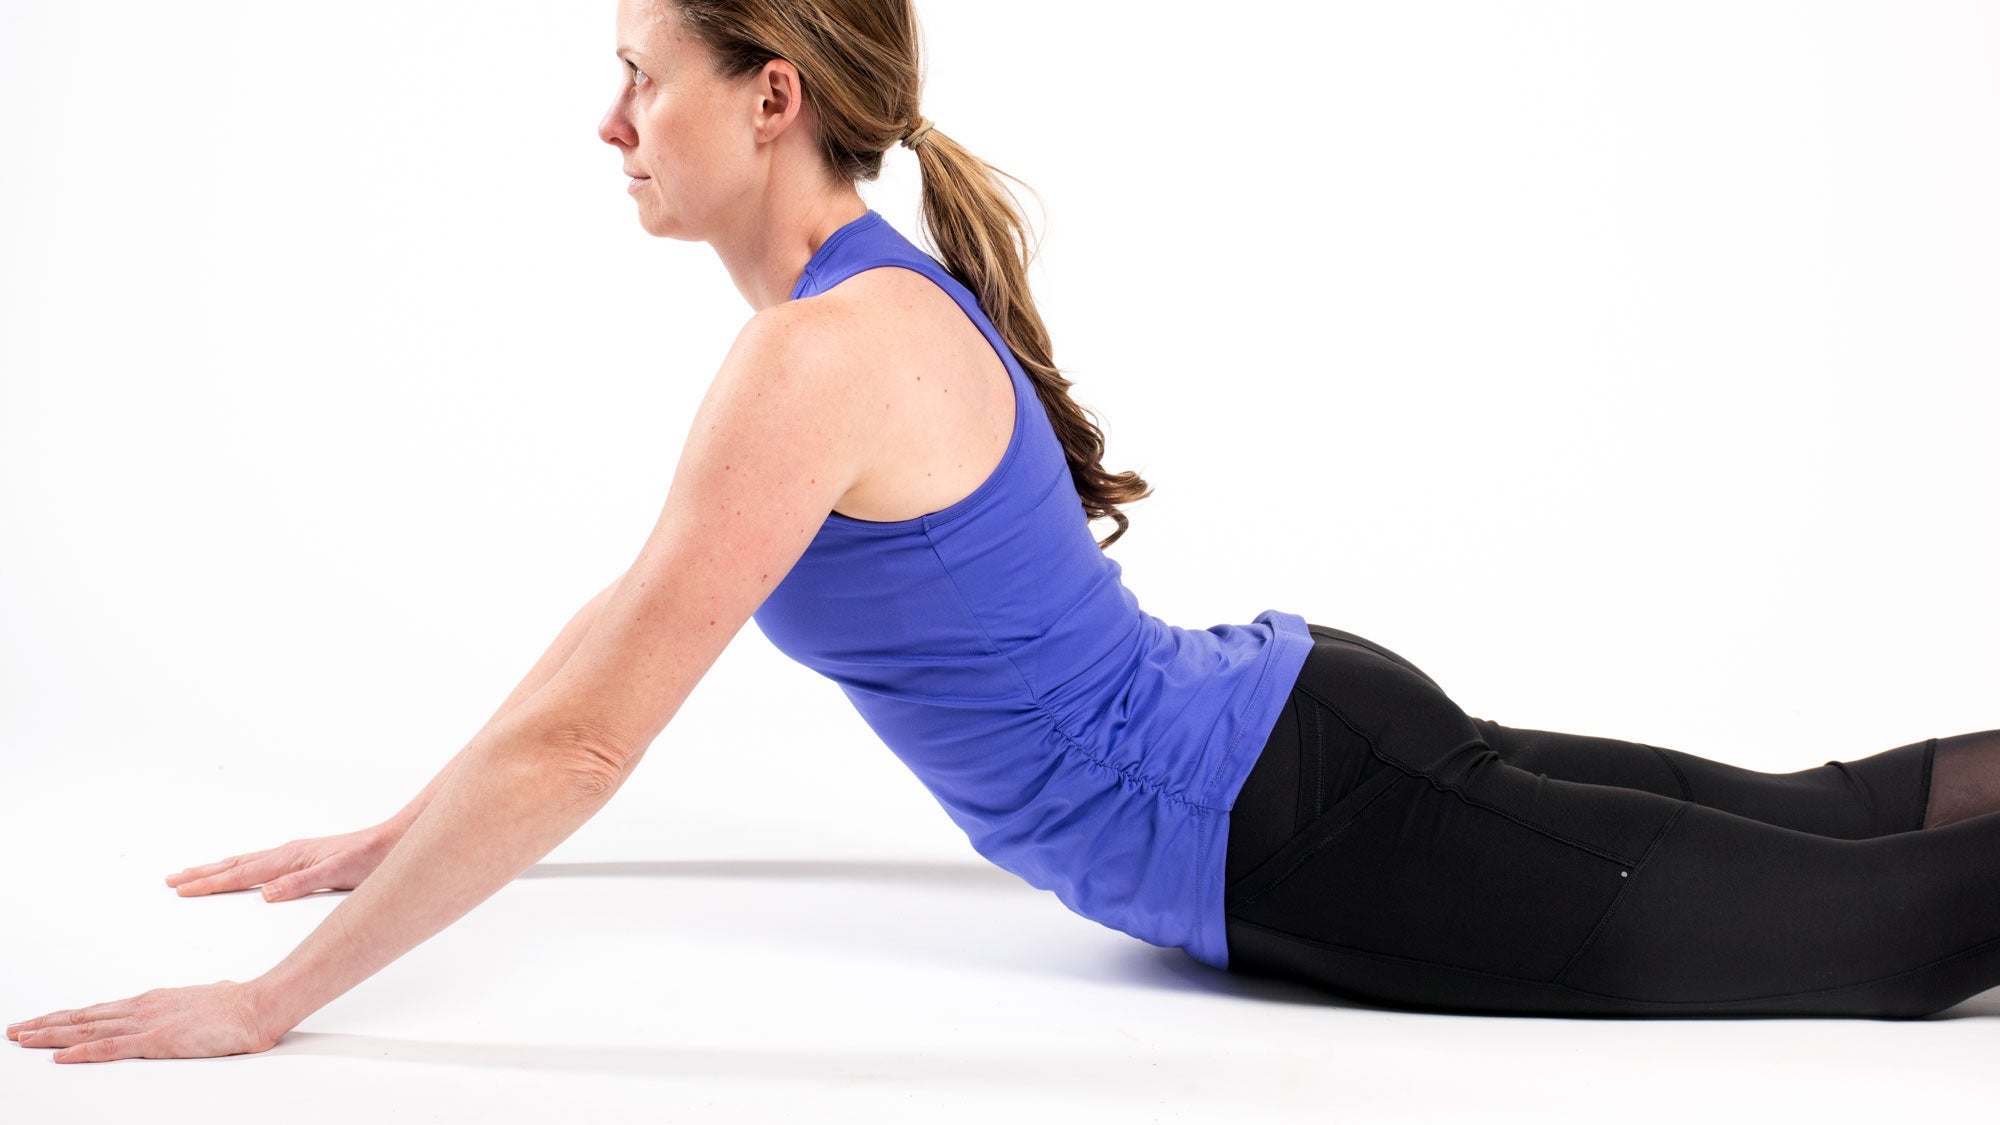 10 Yoga Poses to Avoid for Pelvic Floor Safe Exercises